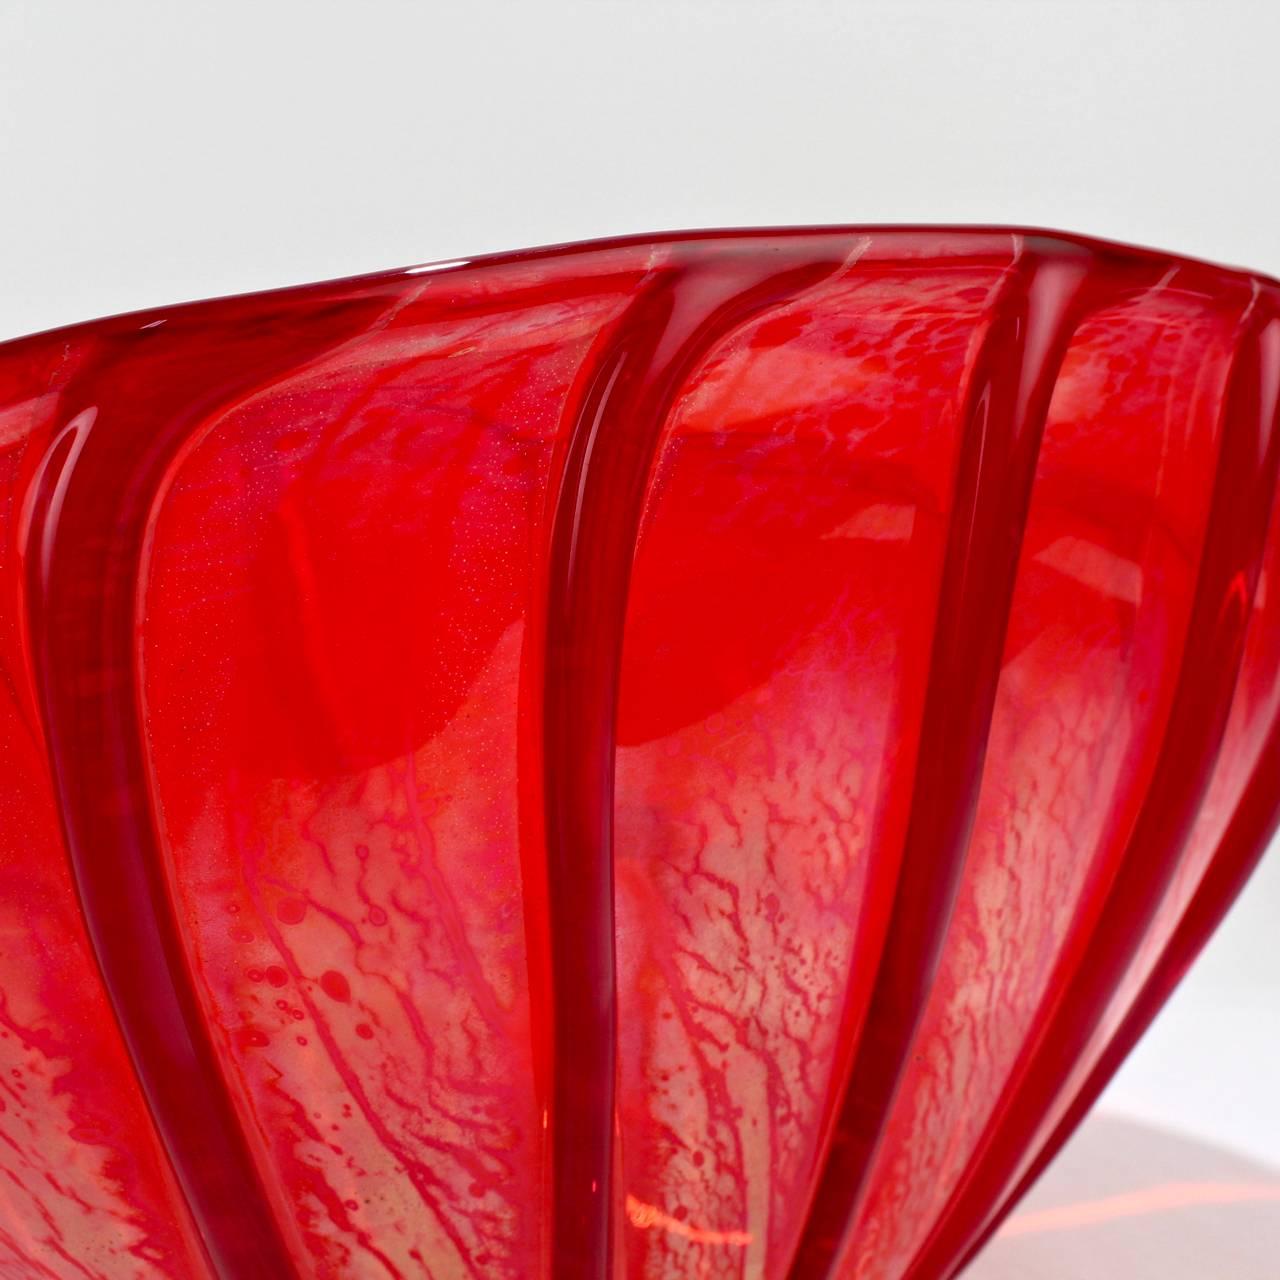 Seguso Viro Limited Edition Nuance Collection Red Murano Glass Vase or Bowl 1